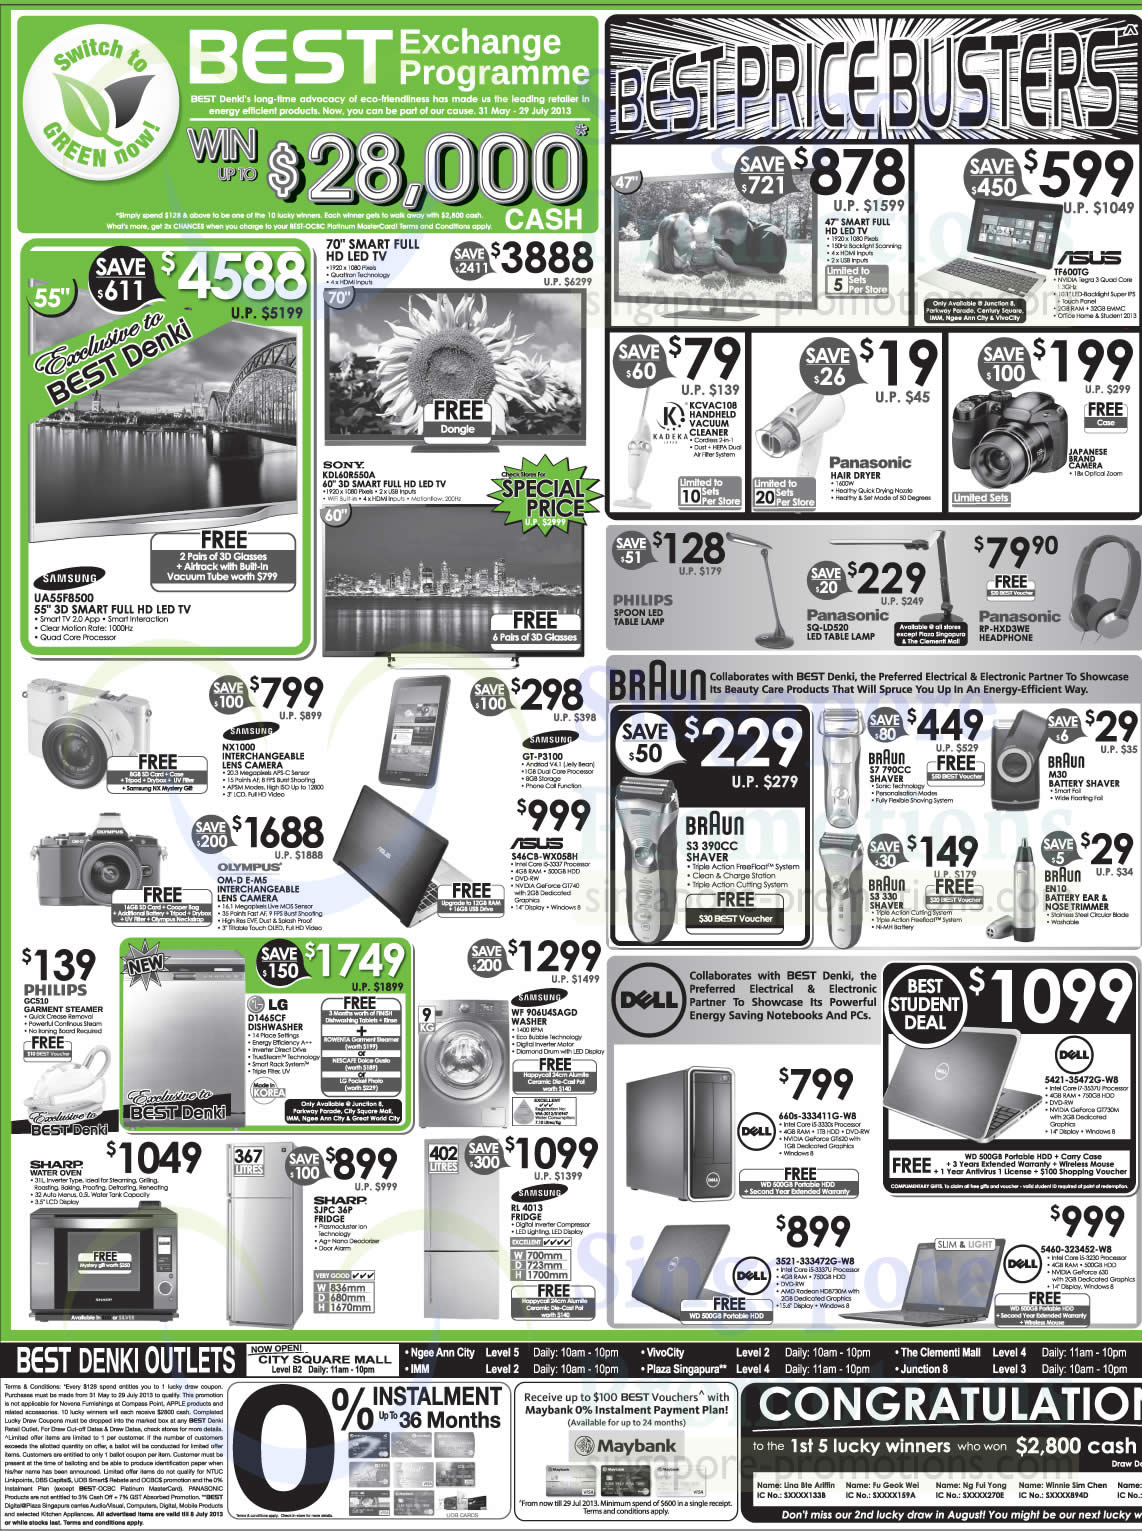 Featured image for Best Denki TV, Notebooks, Digital Cameras & Other Electronics Offers 5 - 8 Jul 2013